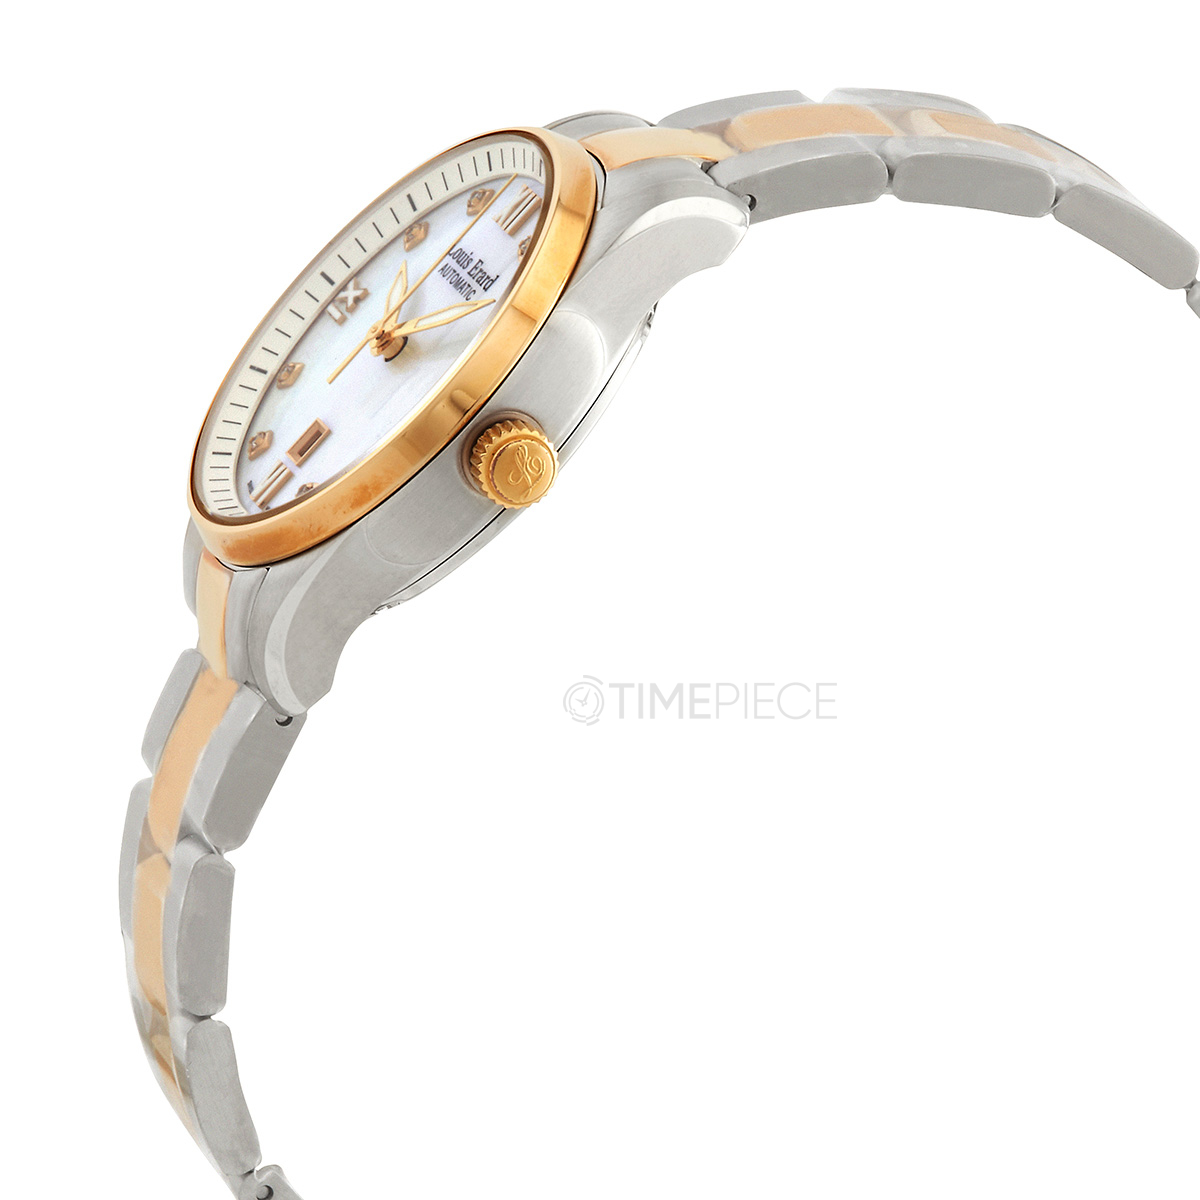 Louis Erard Heritage Automatic Diamond White Dial Ladies Watch 20100AB34BMA20, Automatic Movement, Stainless Steel and 18kt Yellow Gold Strap, 30 mm